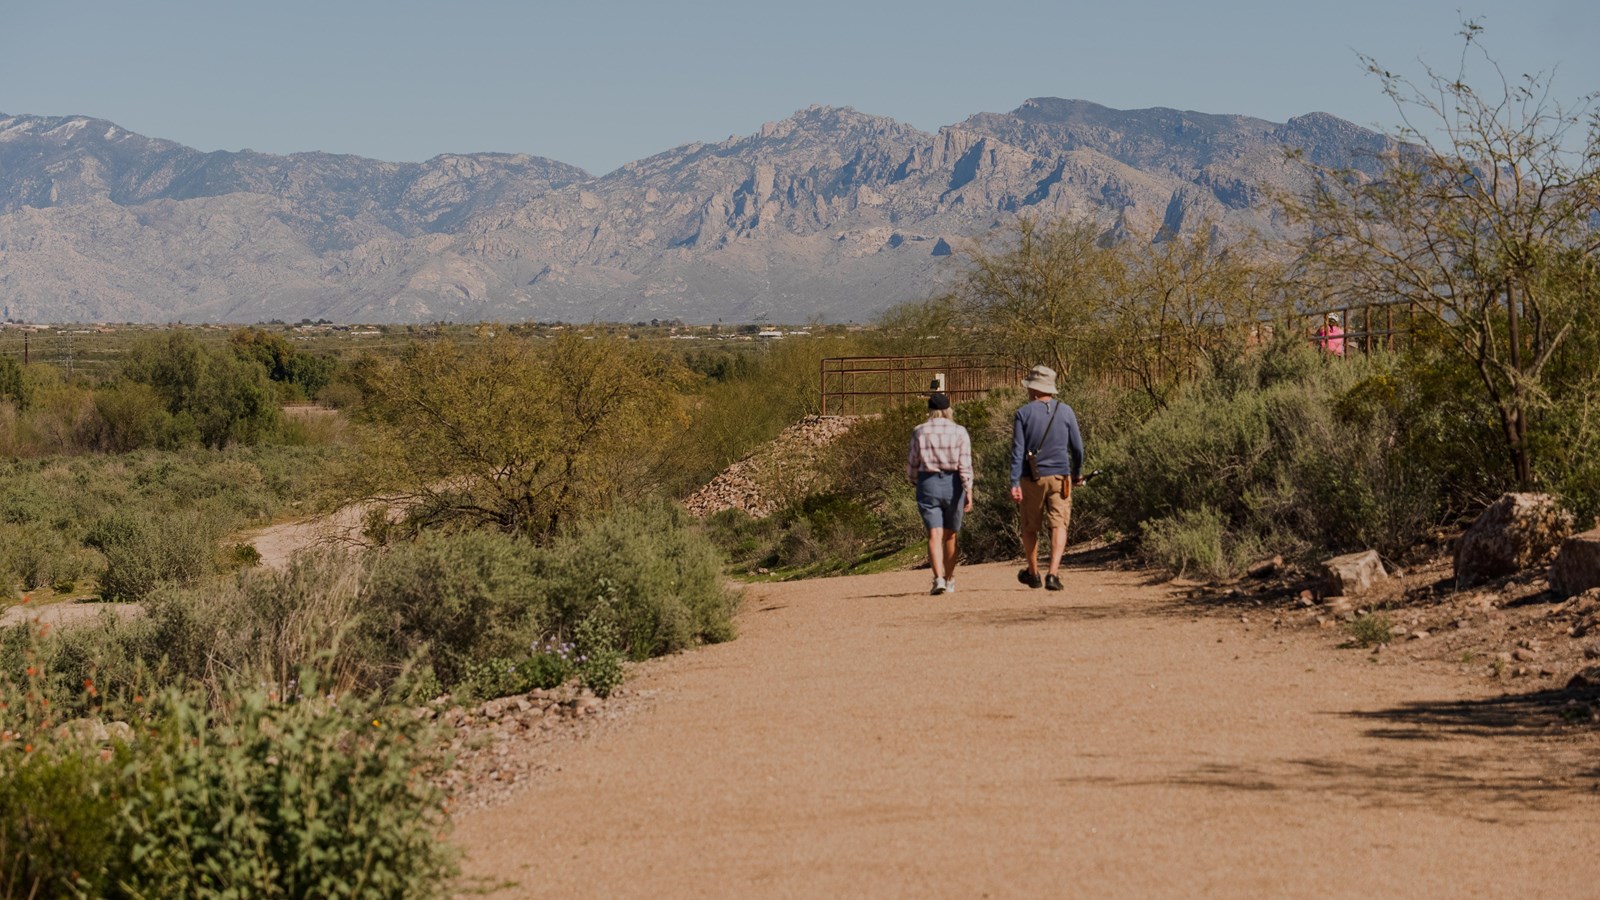 Two hikers walk down a wide dirt trail through cacti with mountains ahead